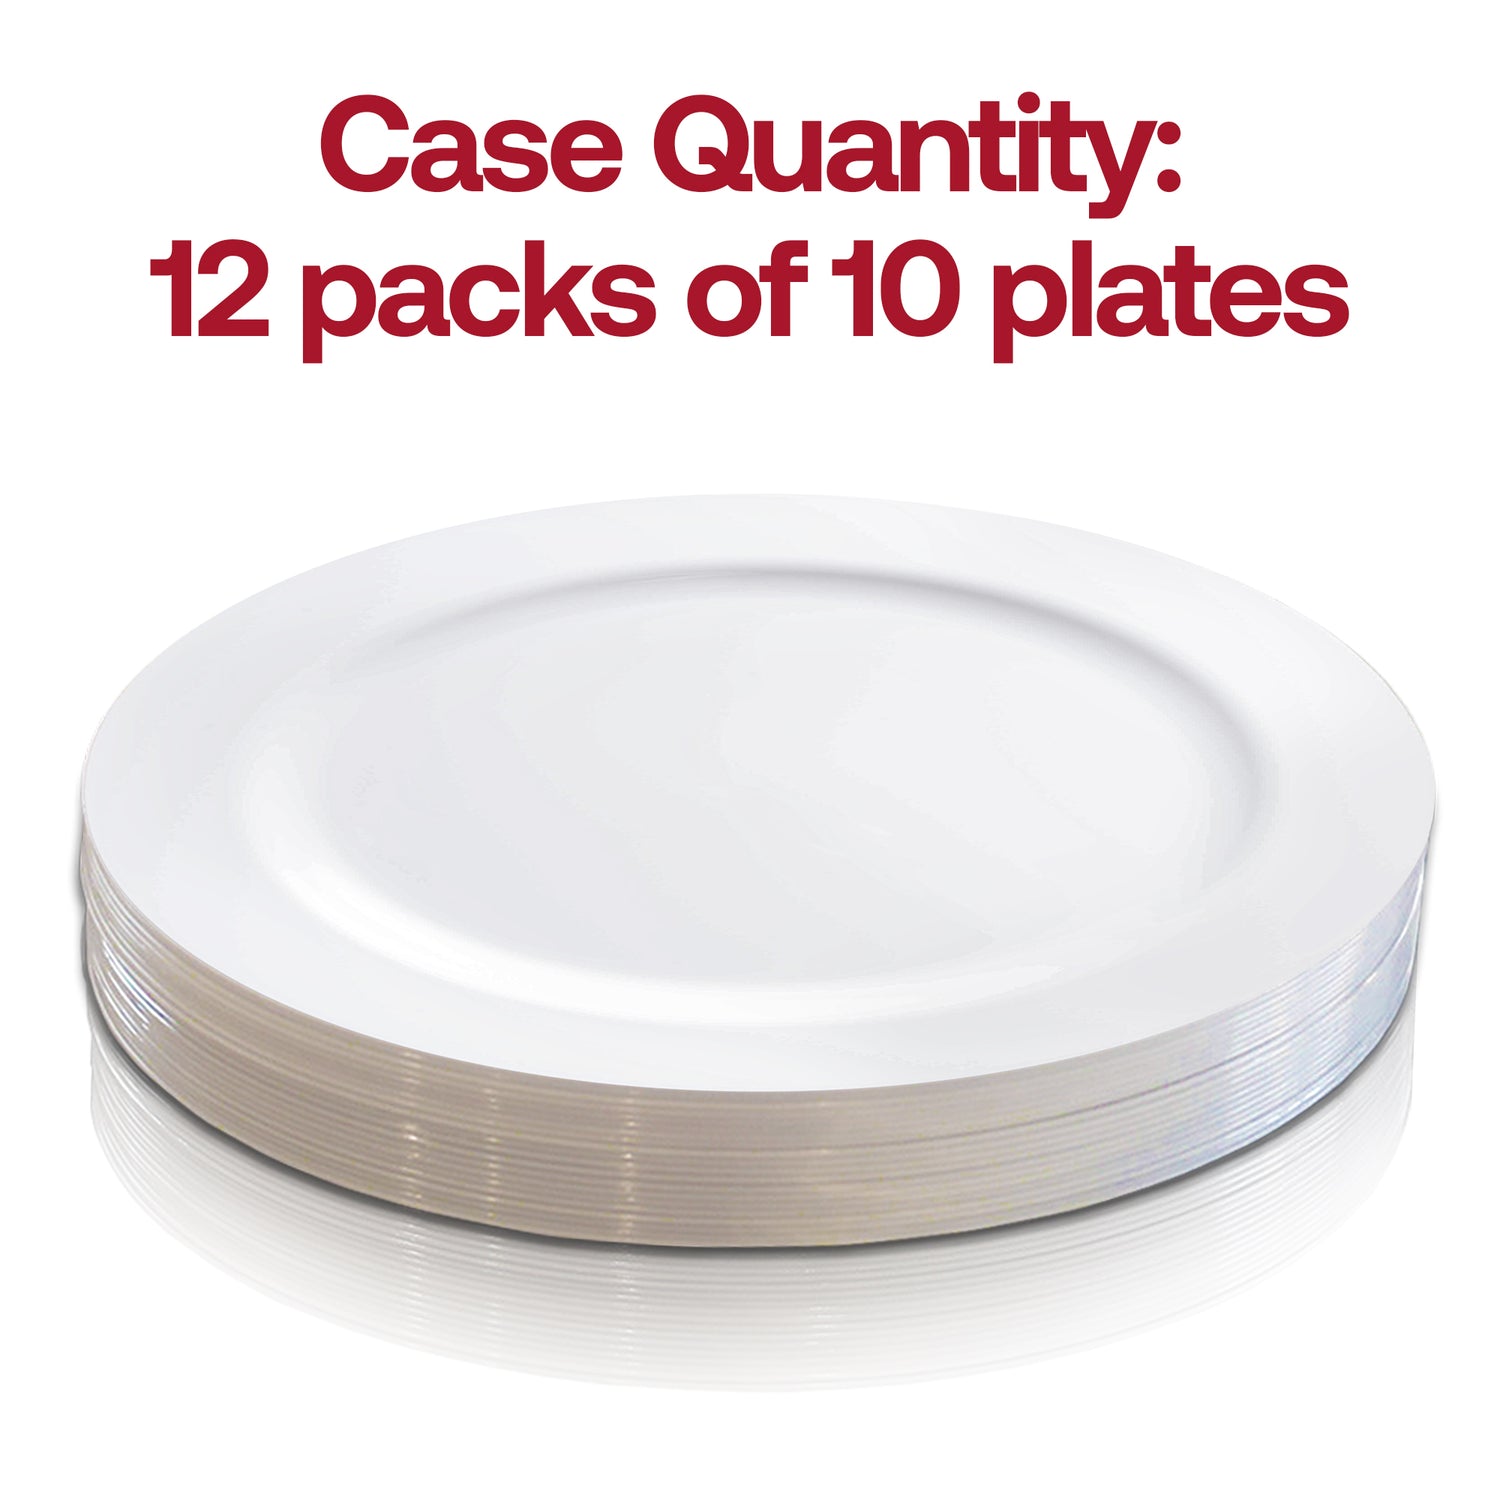 Solid White Economy Round Disposable Plastic Pastry Plates (6.25") Quantity | The Kaya Collection